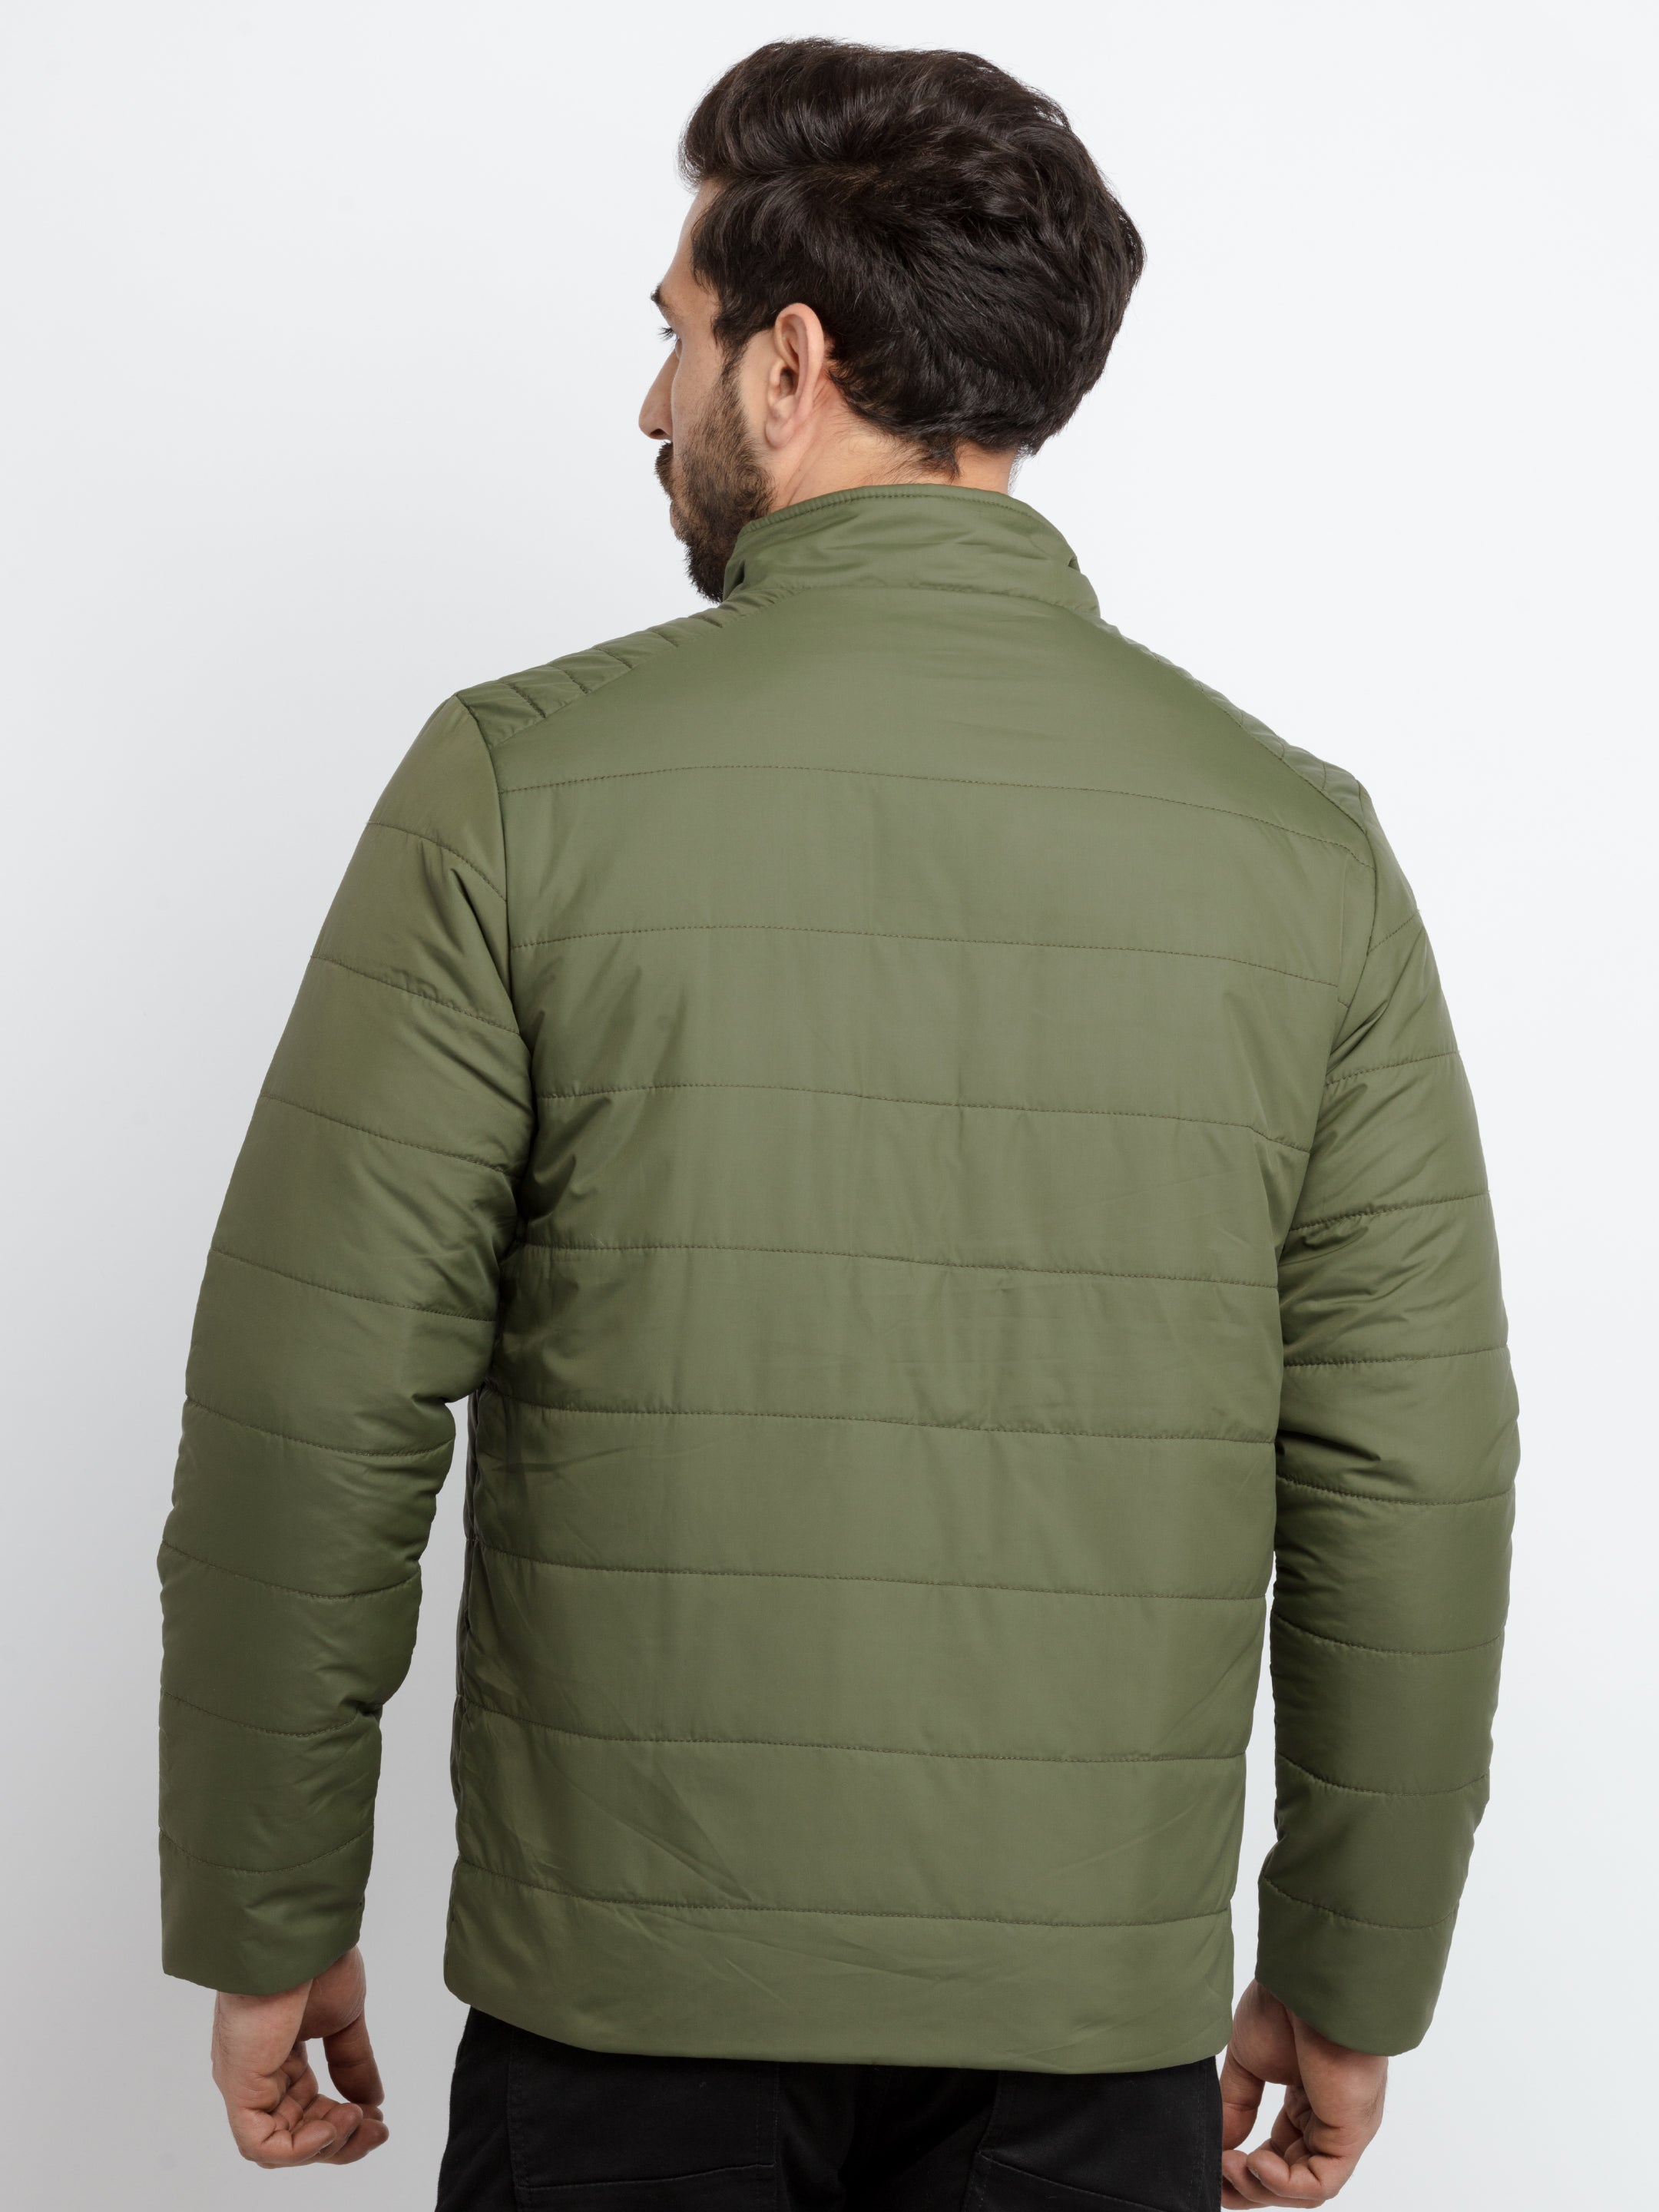 Lululemon Men's Down For It All Jacket Reviewed | International Society of  Precision Agriculture